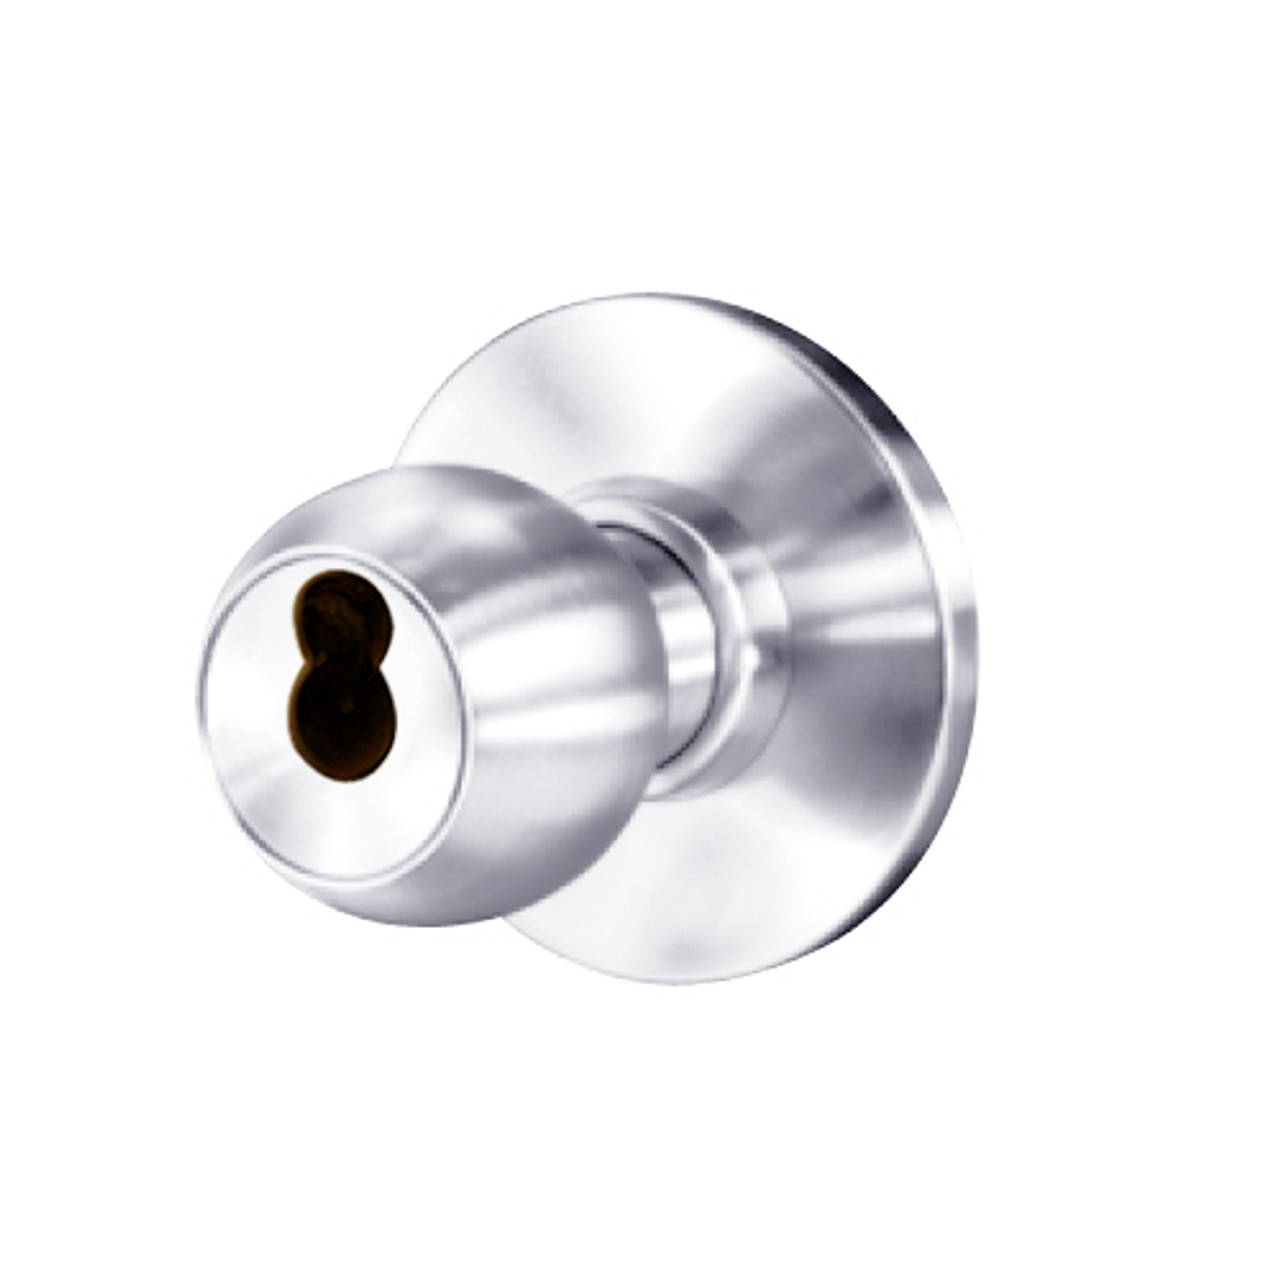 8K37YD4AS3625 Best 8K Series Exit Heavy Duty Cylindrical Knob Locks with Round Style in Bright Chrome